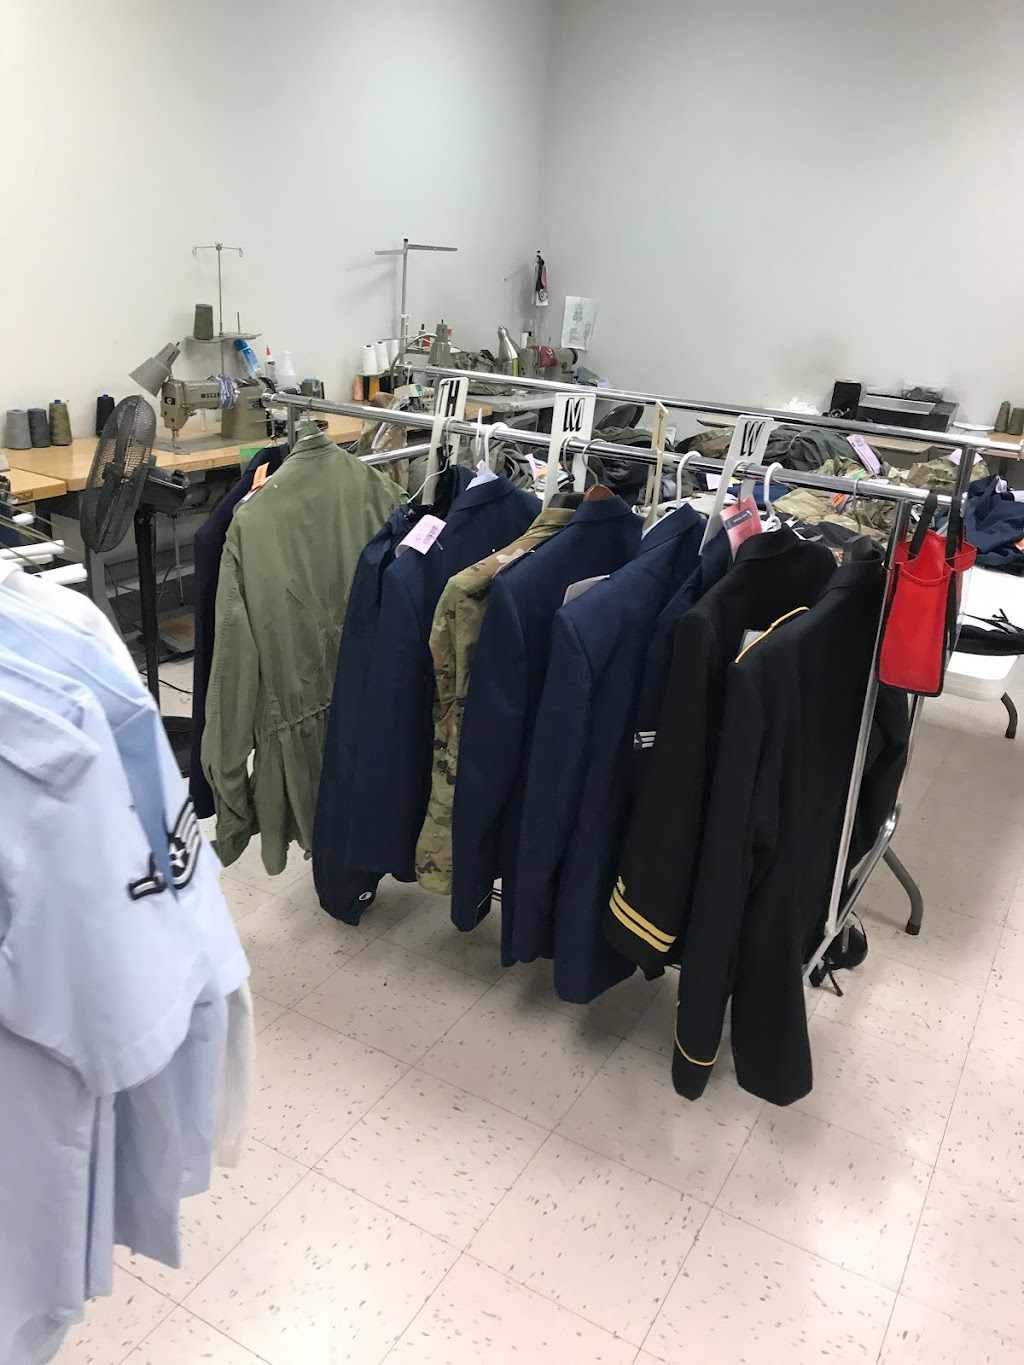 stripes alterations and dry cleaning | 461 Skymaster Dr, Fairfield, CA 94535 | Phone: (707) 673-2220